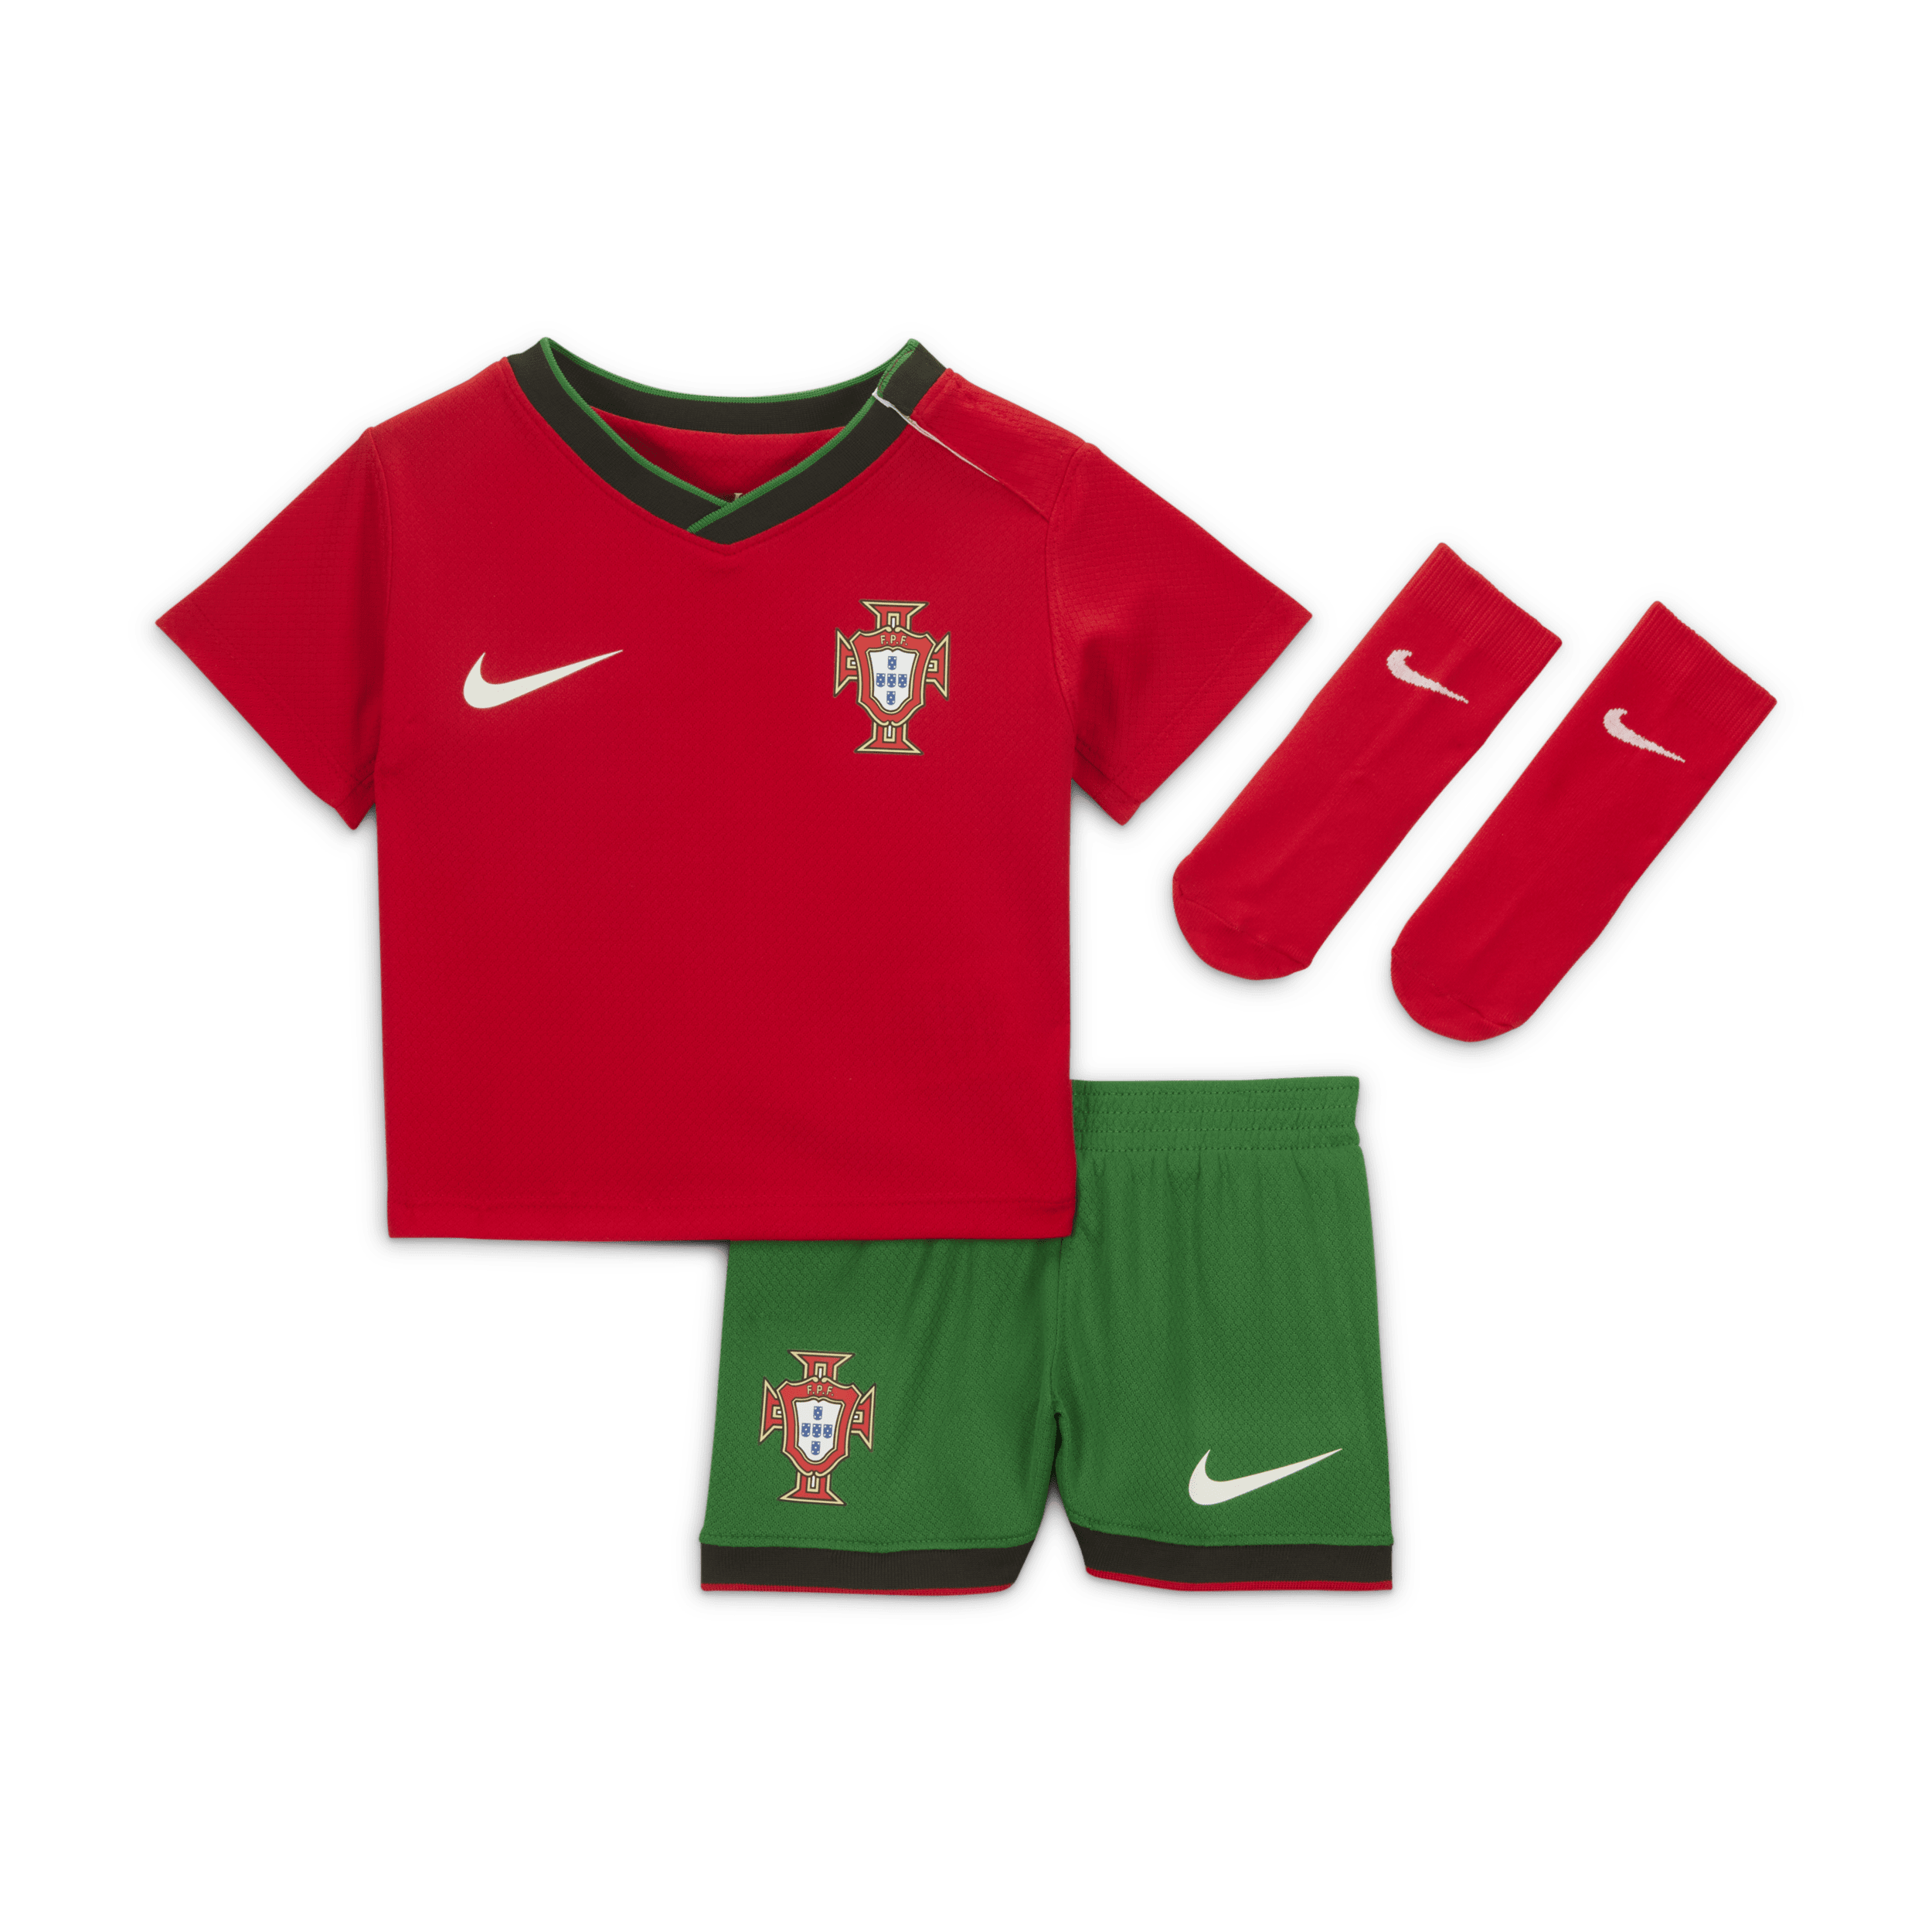 Nike Portugal 2024 Stadium Thuis driedelig replica voetbaltenue voor baby's peuters Rood